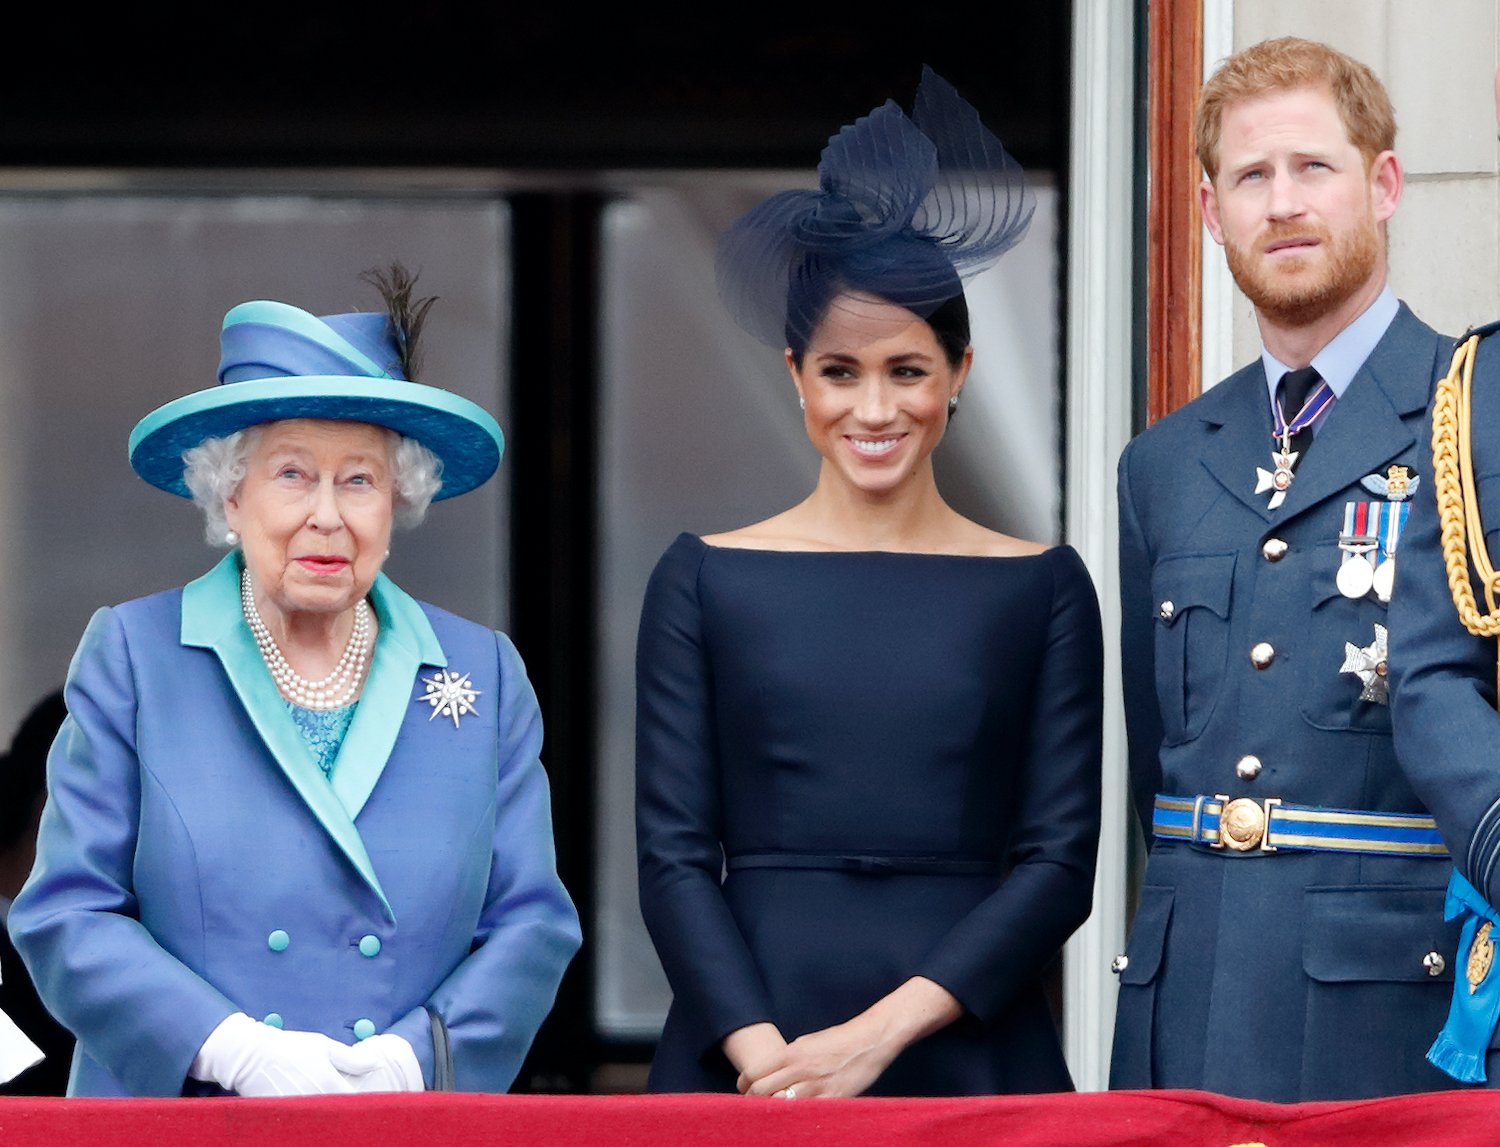 Queen Elizabeth II, Meghan Markle, and Prince Harry watch a flypast to mark the centenary of the Royal Air Force from the balcony of Buckingham Palace